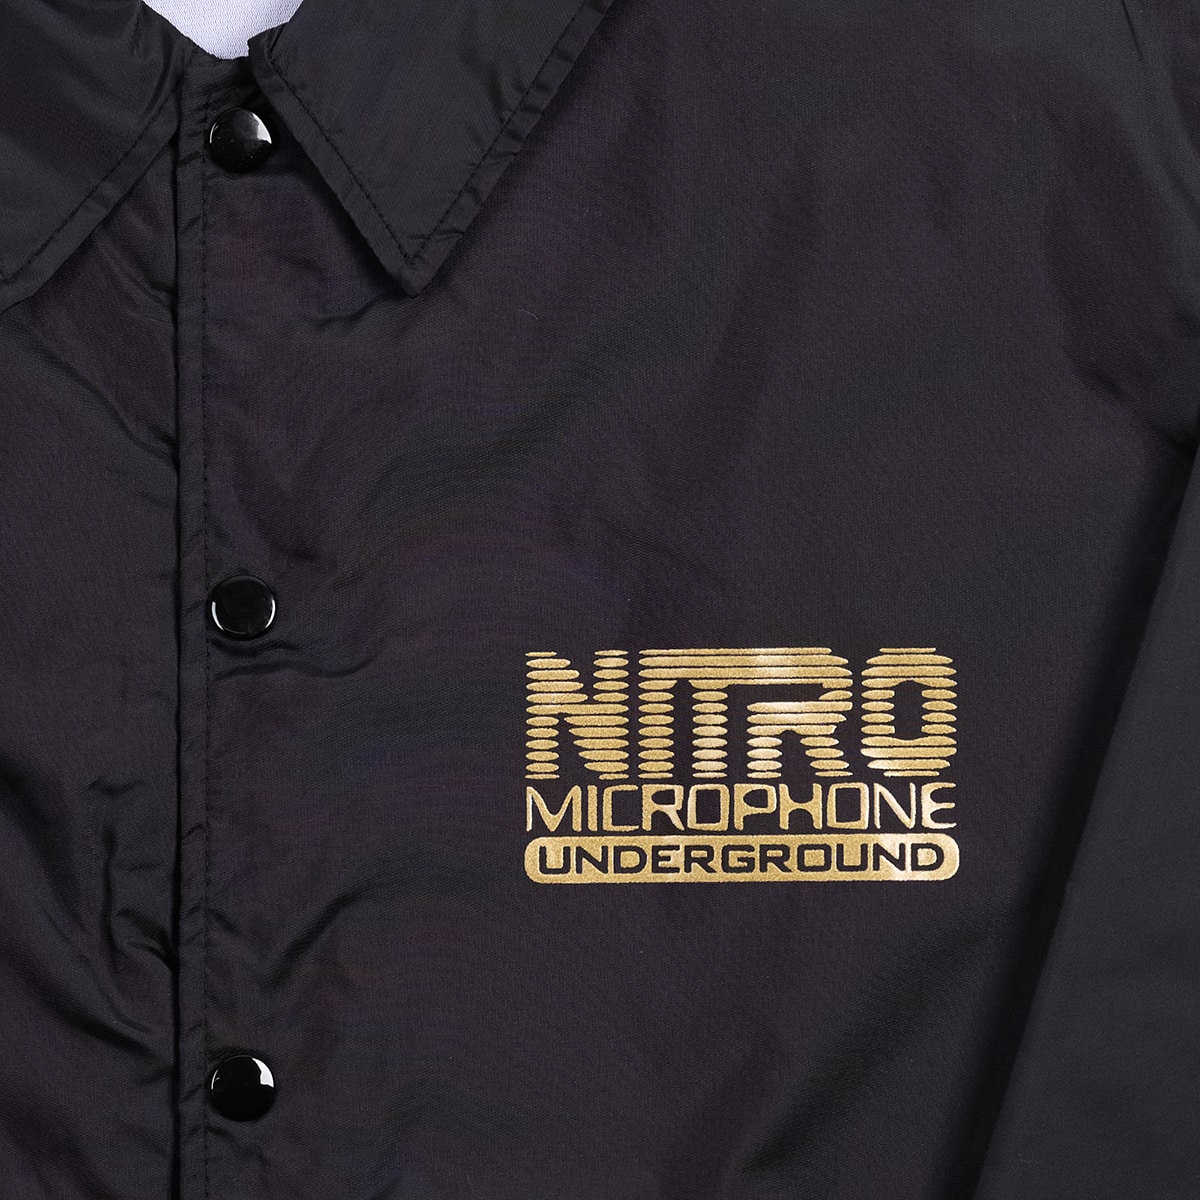 NITRO MICROPHONE UNDERGROUND SPECIAL FORCE LOGO COACH JACKT GOLD ...